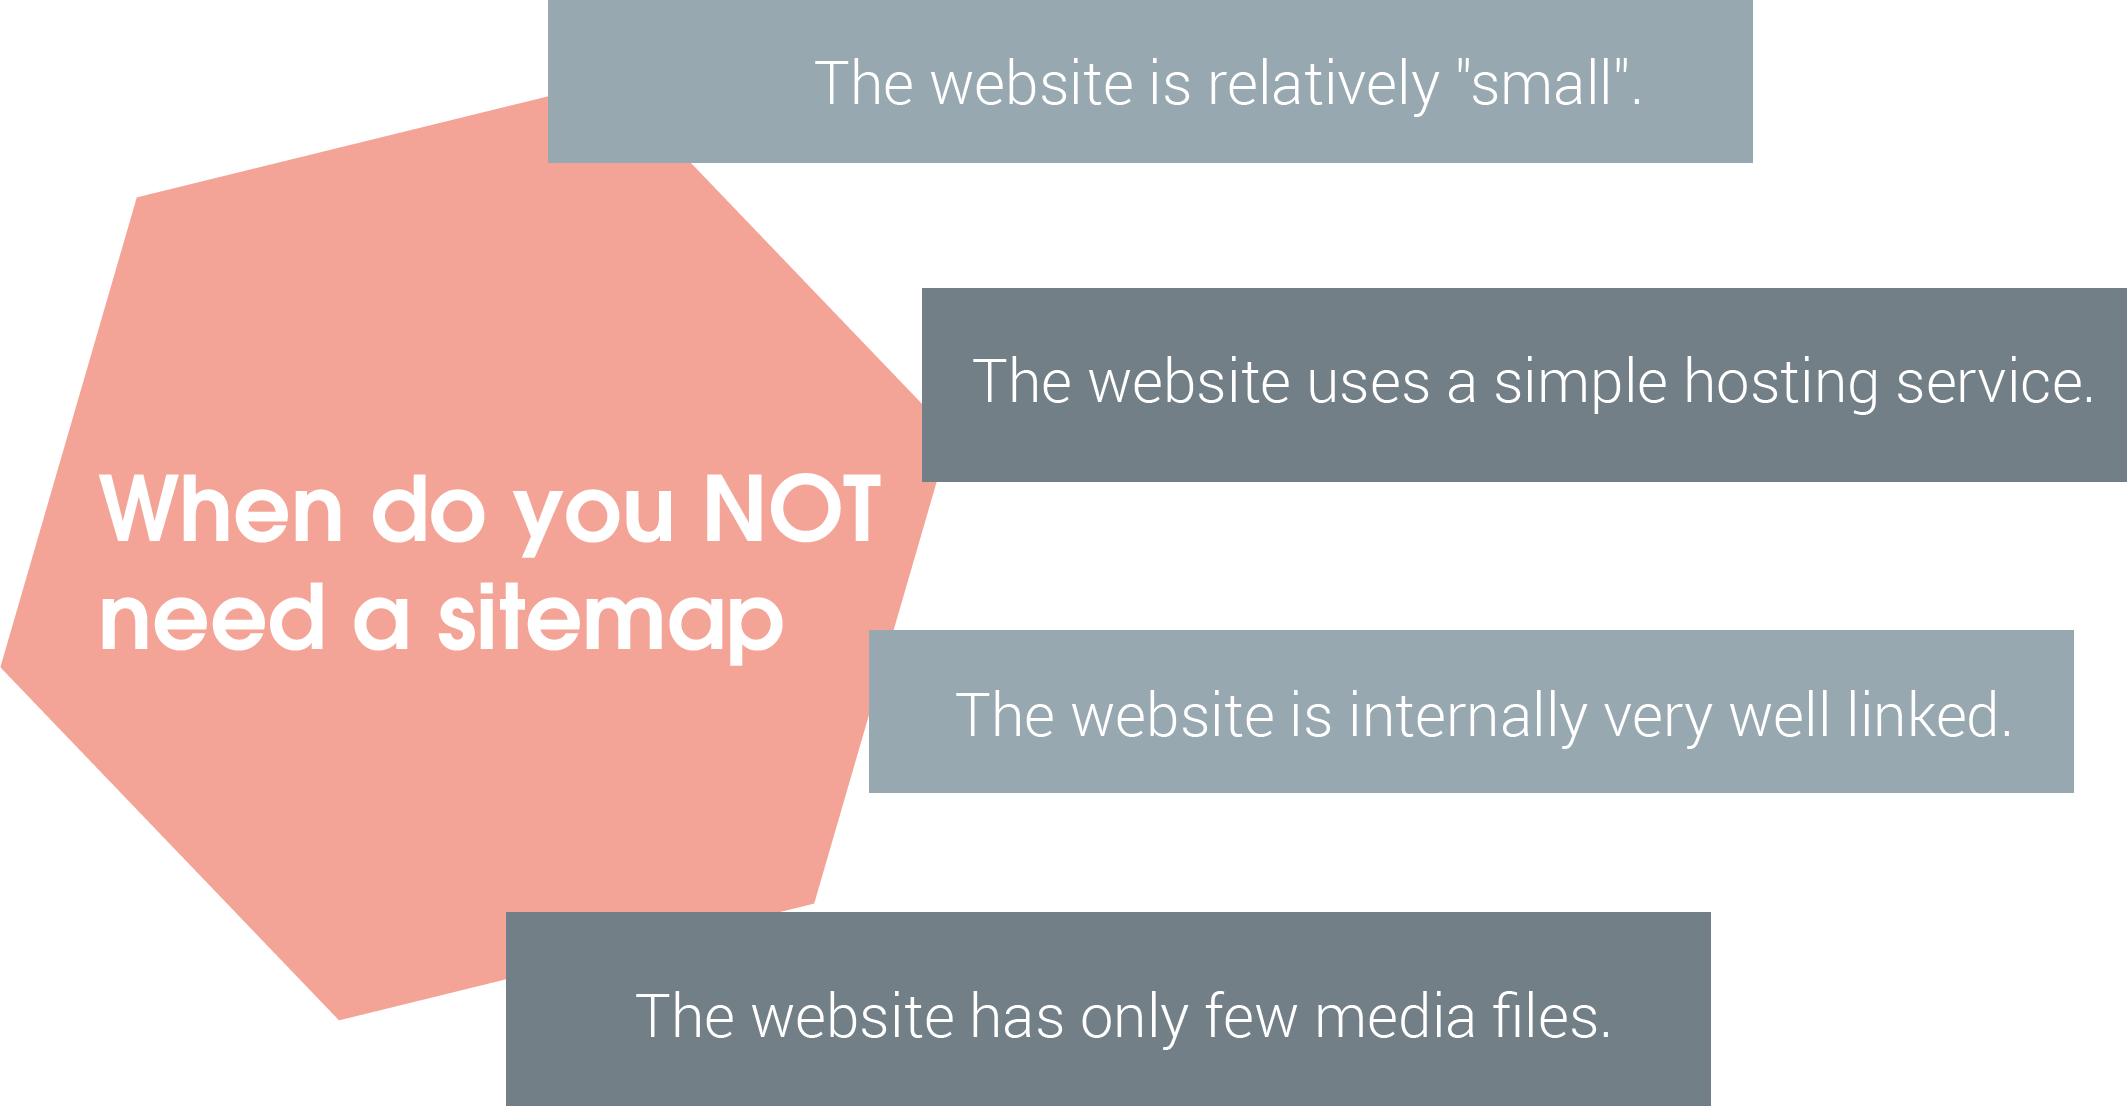 When do you not need a sitemap? There are four cases for this:
1. The website is relatively "small".
2. The website uses a simple hosting service.
3. The website is internally very well linked.
4. The website has only few media files.